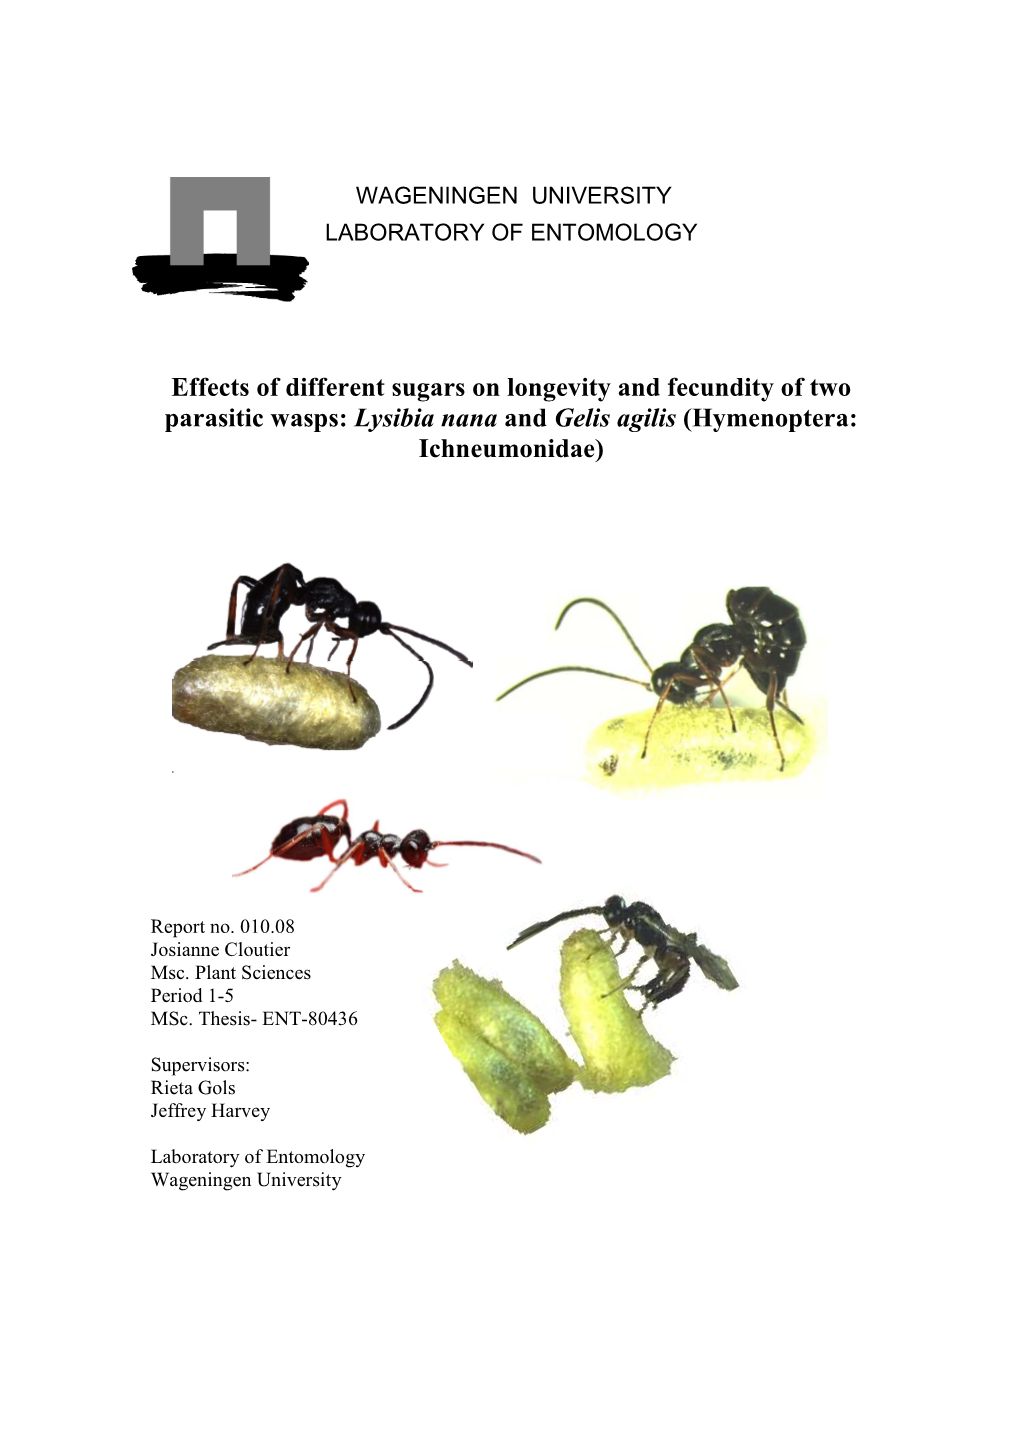 Effects of Different Sugars on Longevity and Fecundity of Two Parasitic Wasps: Lysibia Nana and Gelis Agilis (Hymenoptera: Ichneumonidae)